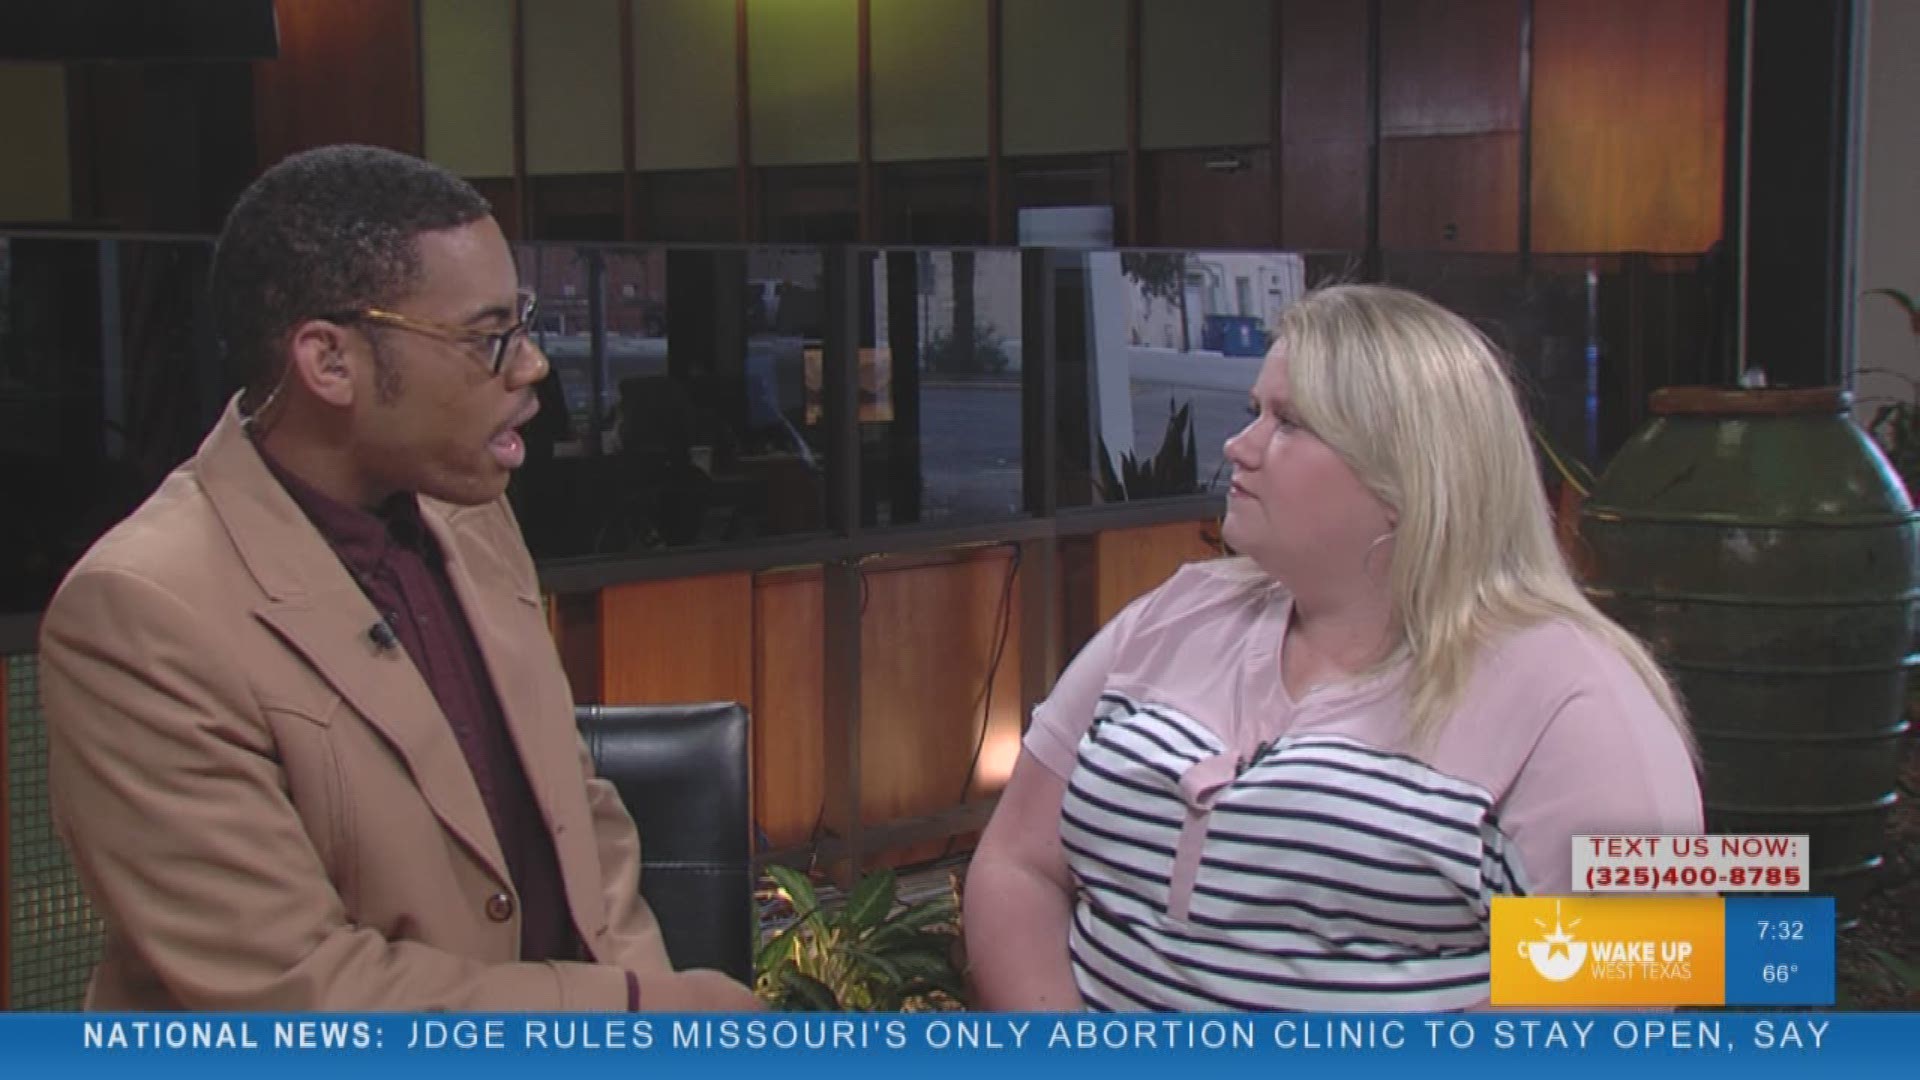 Our Malik Mingo spoke with a business adviser at the Angelo State University Small Business Development Center about its upcoming seminar on networking scheduled for June 11.